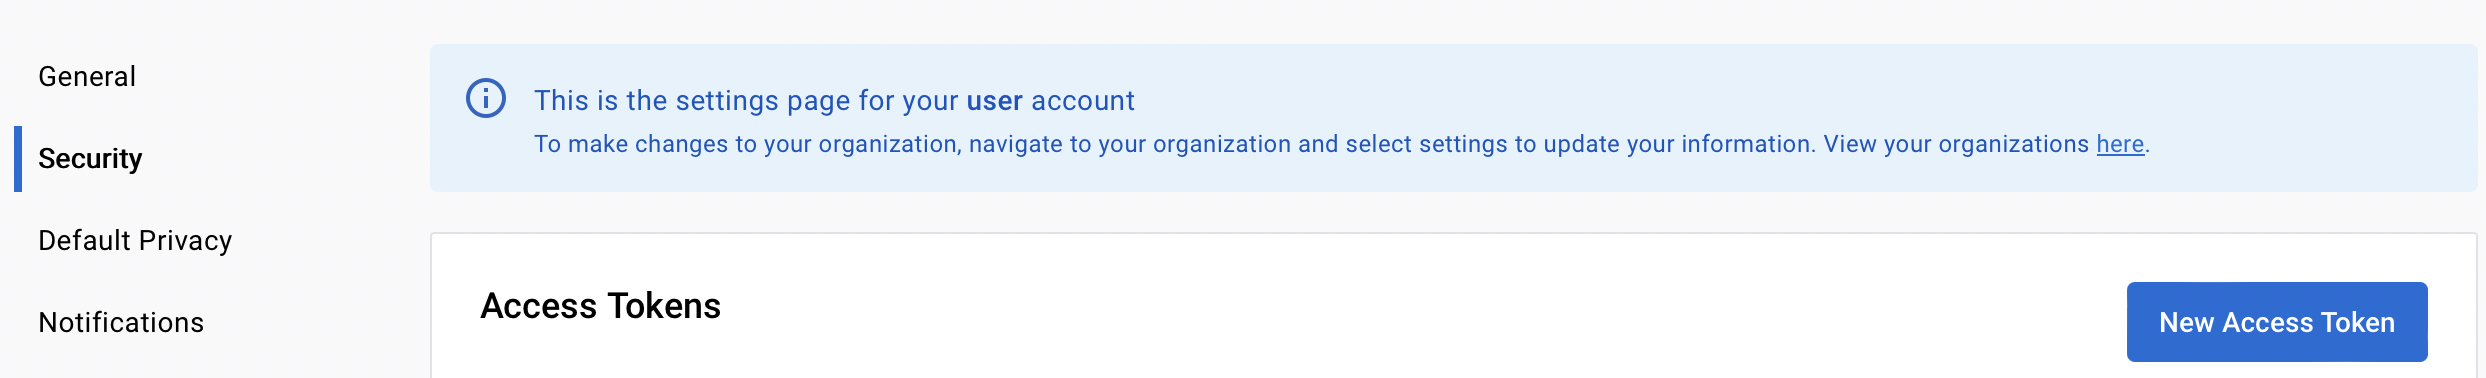 Docker Hub - Account page with the "Security" tab active and a rectangle highlighting the "New Access Token" button in the UI